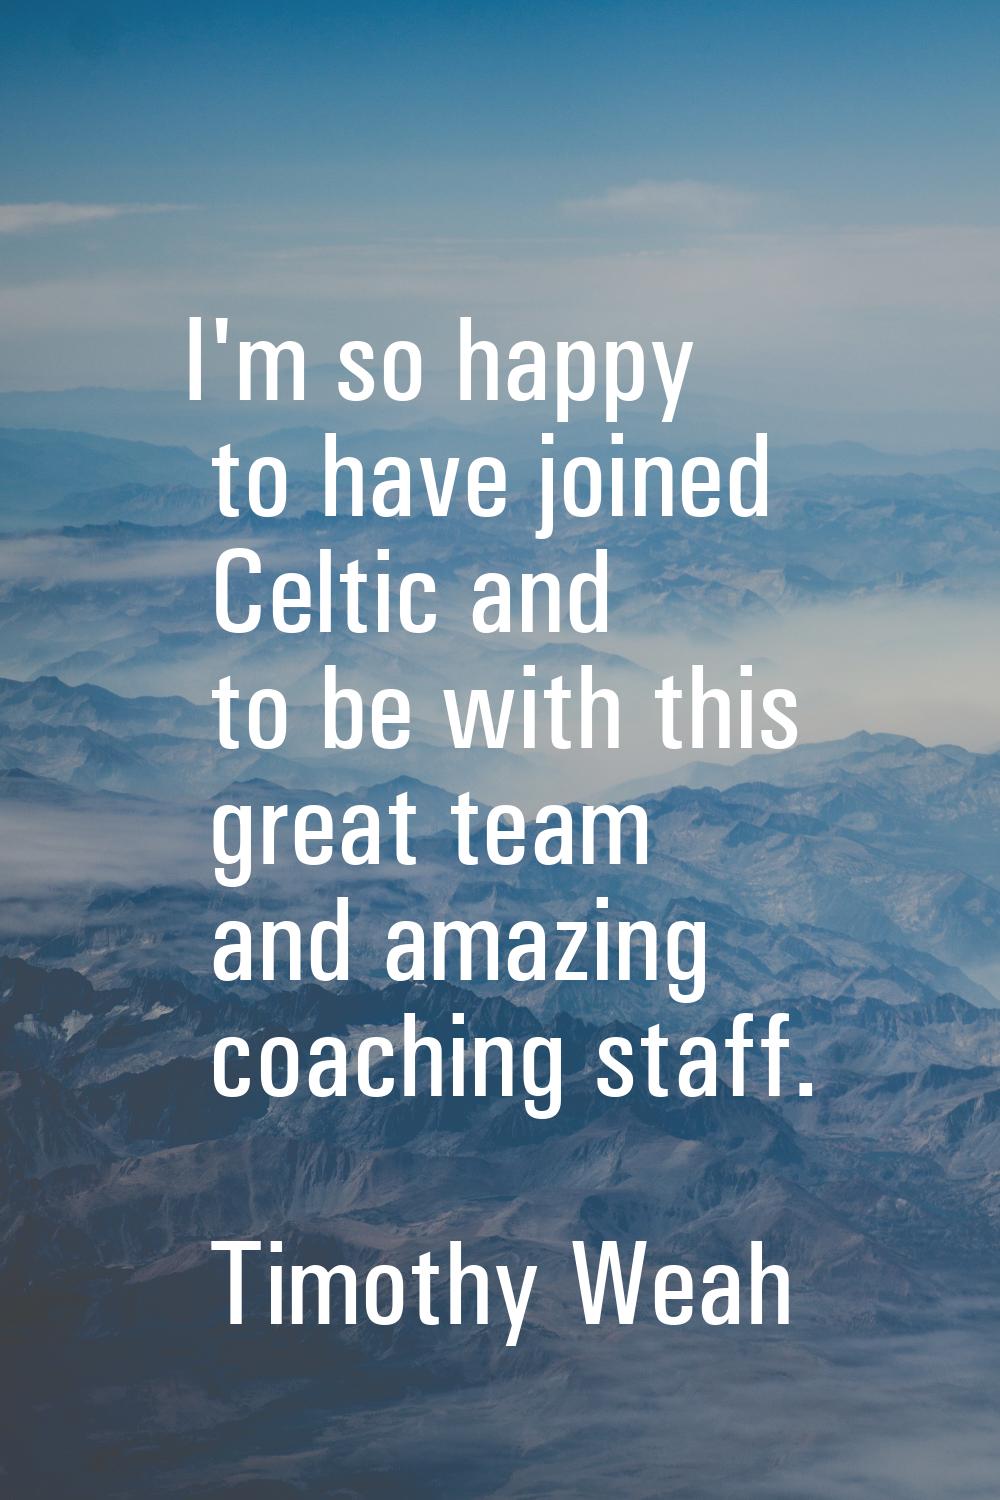 I'm so happy to have joined Celtic and to be with this great team and amazing coaching staff.